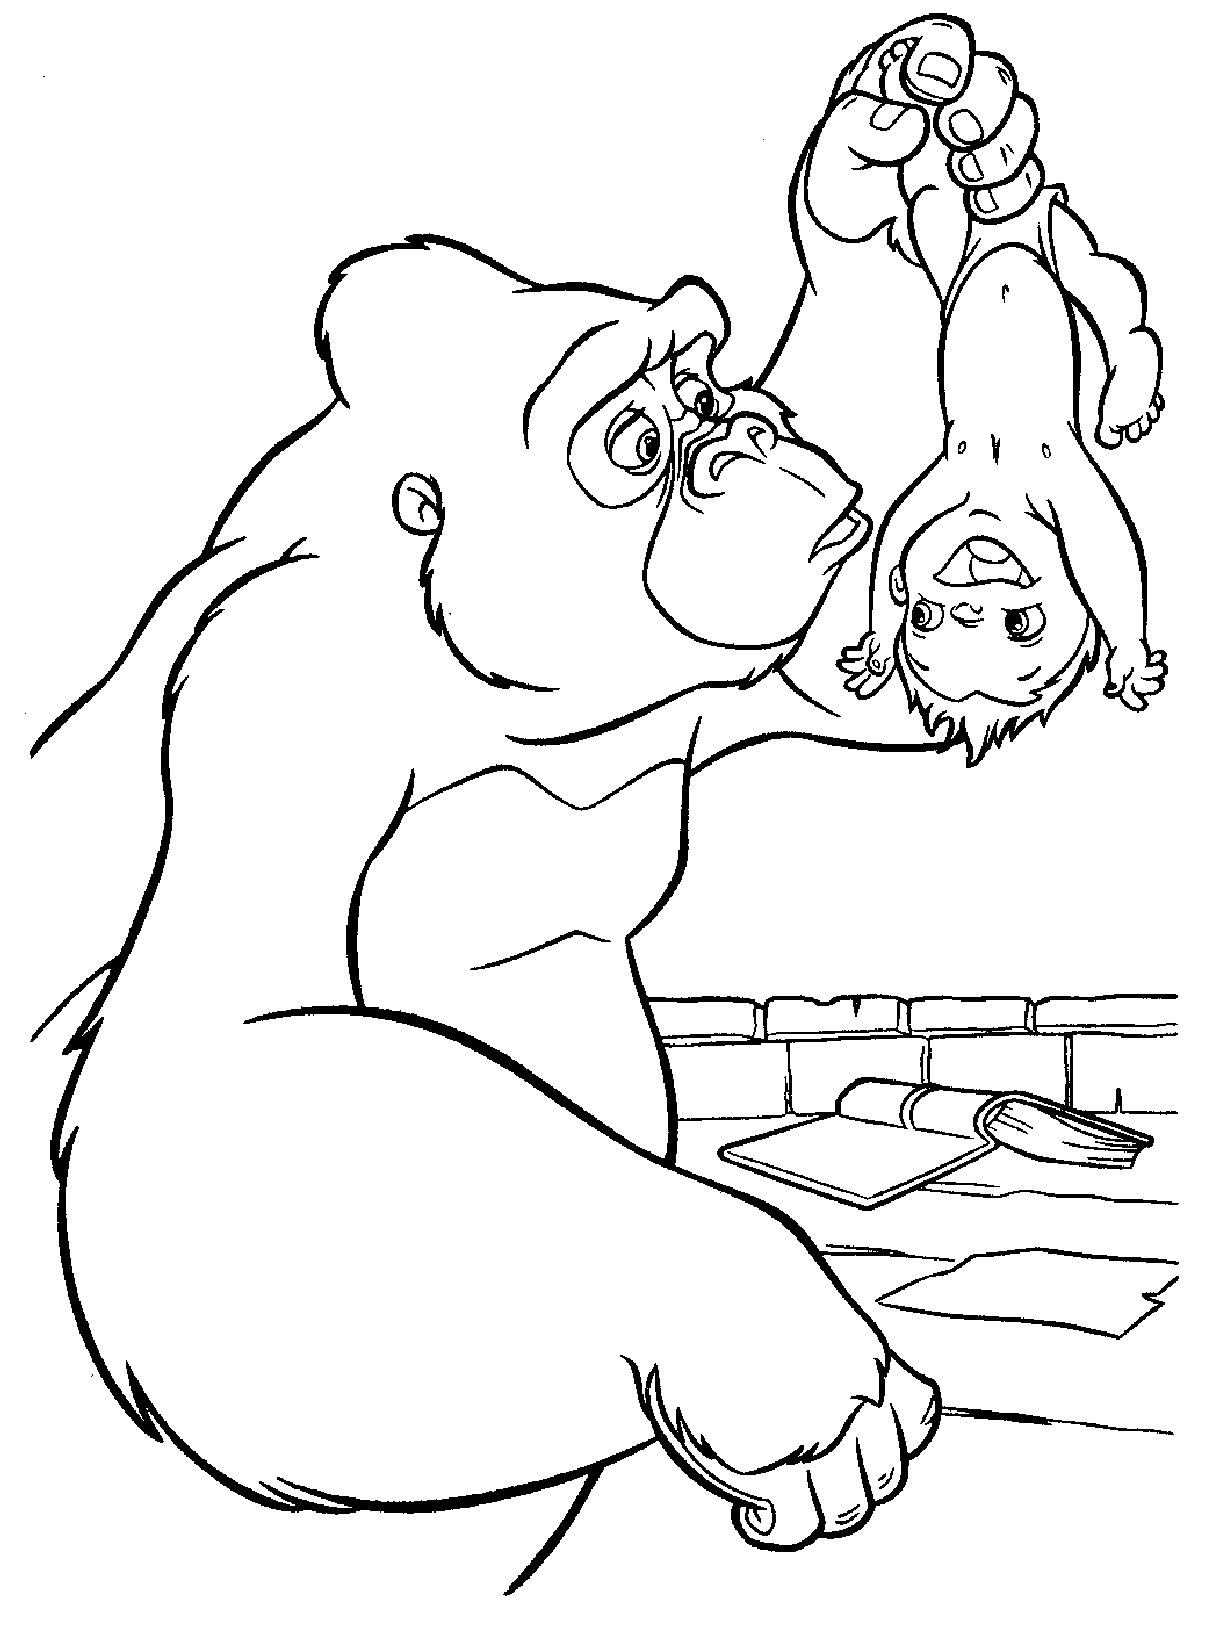 Tarzan Coloring Pages Best Coloring Pages For Kids